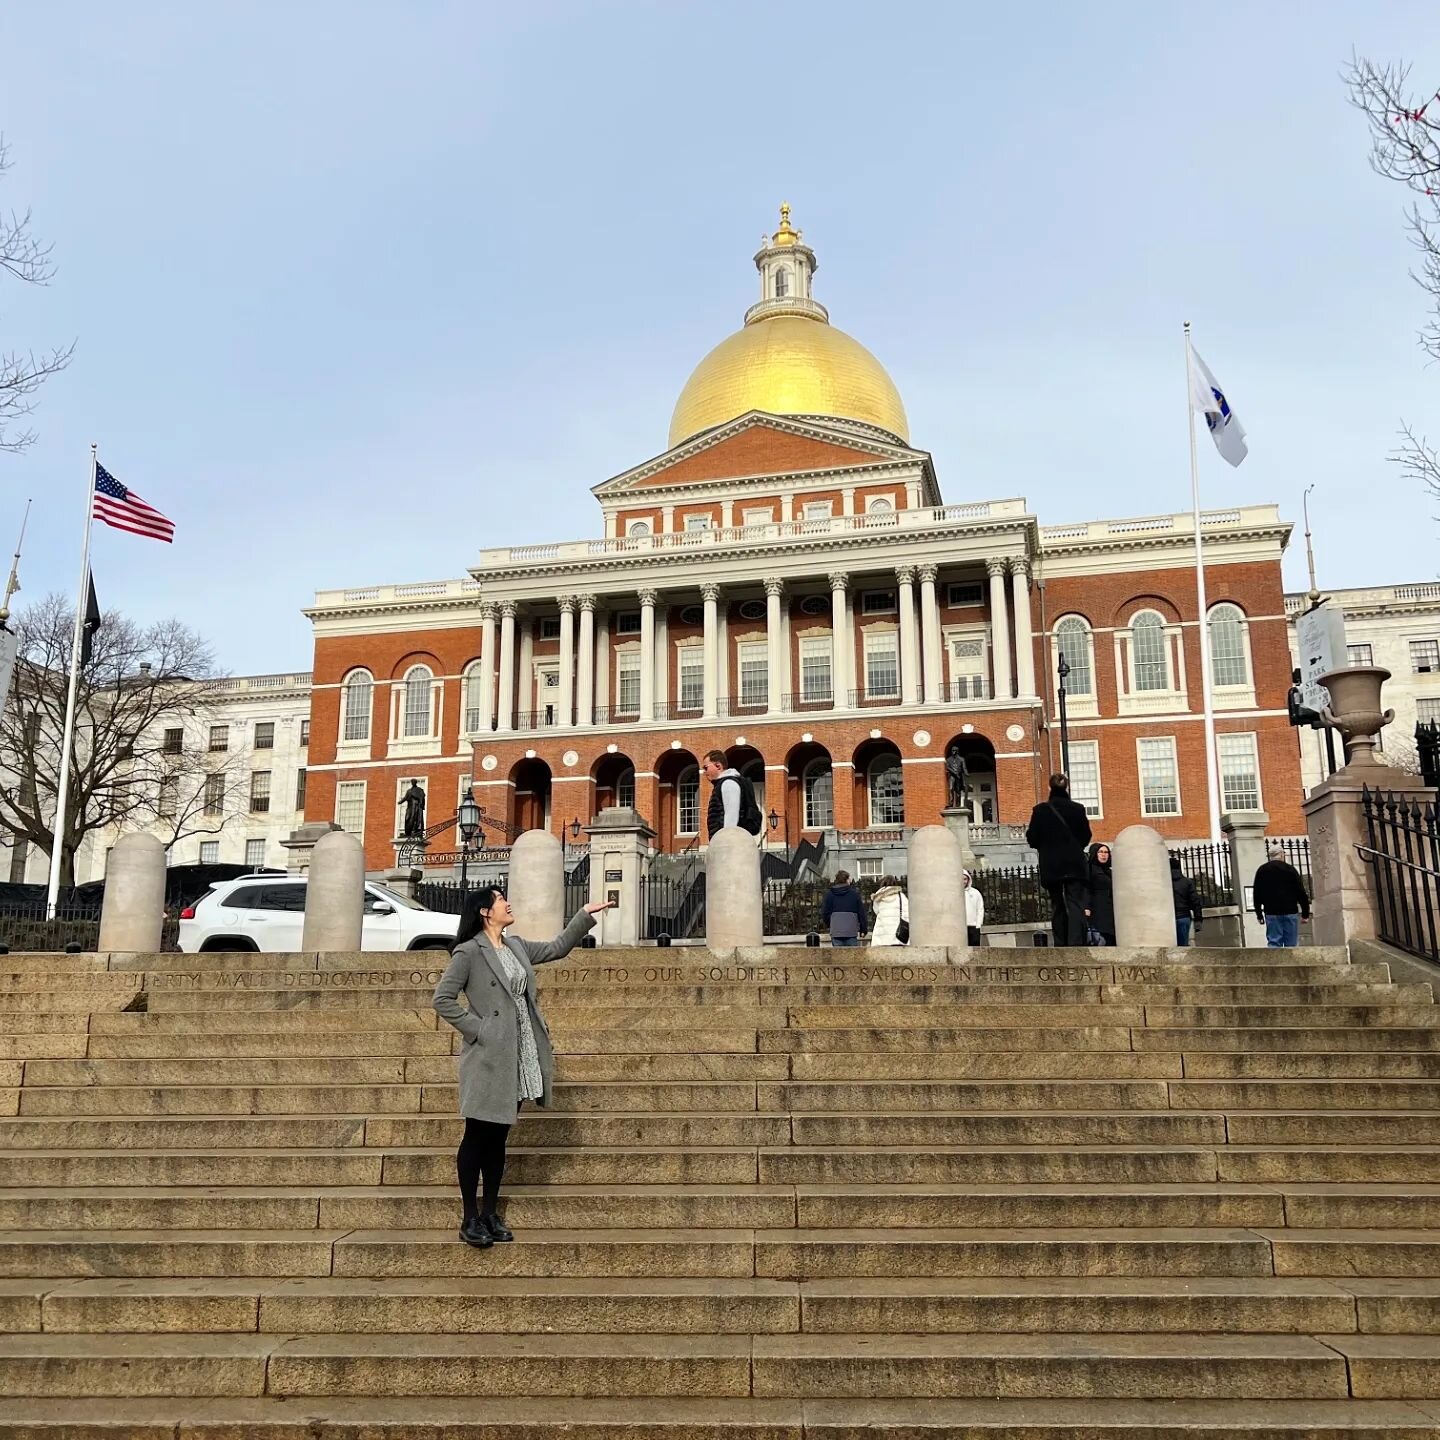 *DRUM ROLLl* Today was Massachusetts Book Award (20, 21, 22) and Tiny Feet Between the Mountain is on the Must-Read list for 2020 🐯!!! Also first time at the state house and it was so cool- historyyy!! splendorrr!!

I don't know why but gosh I was s